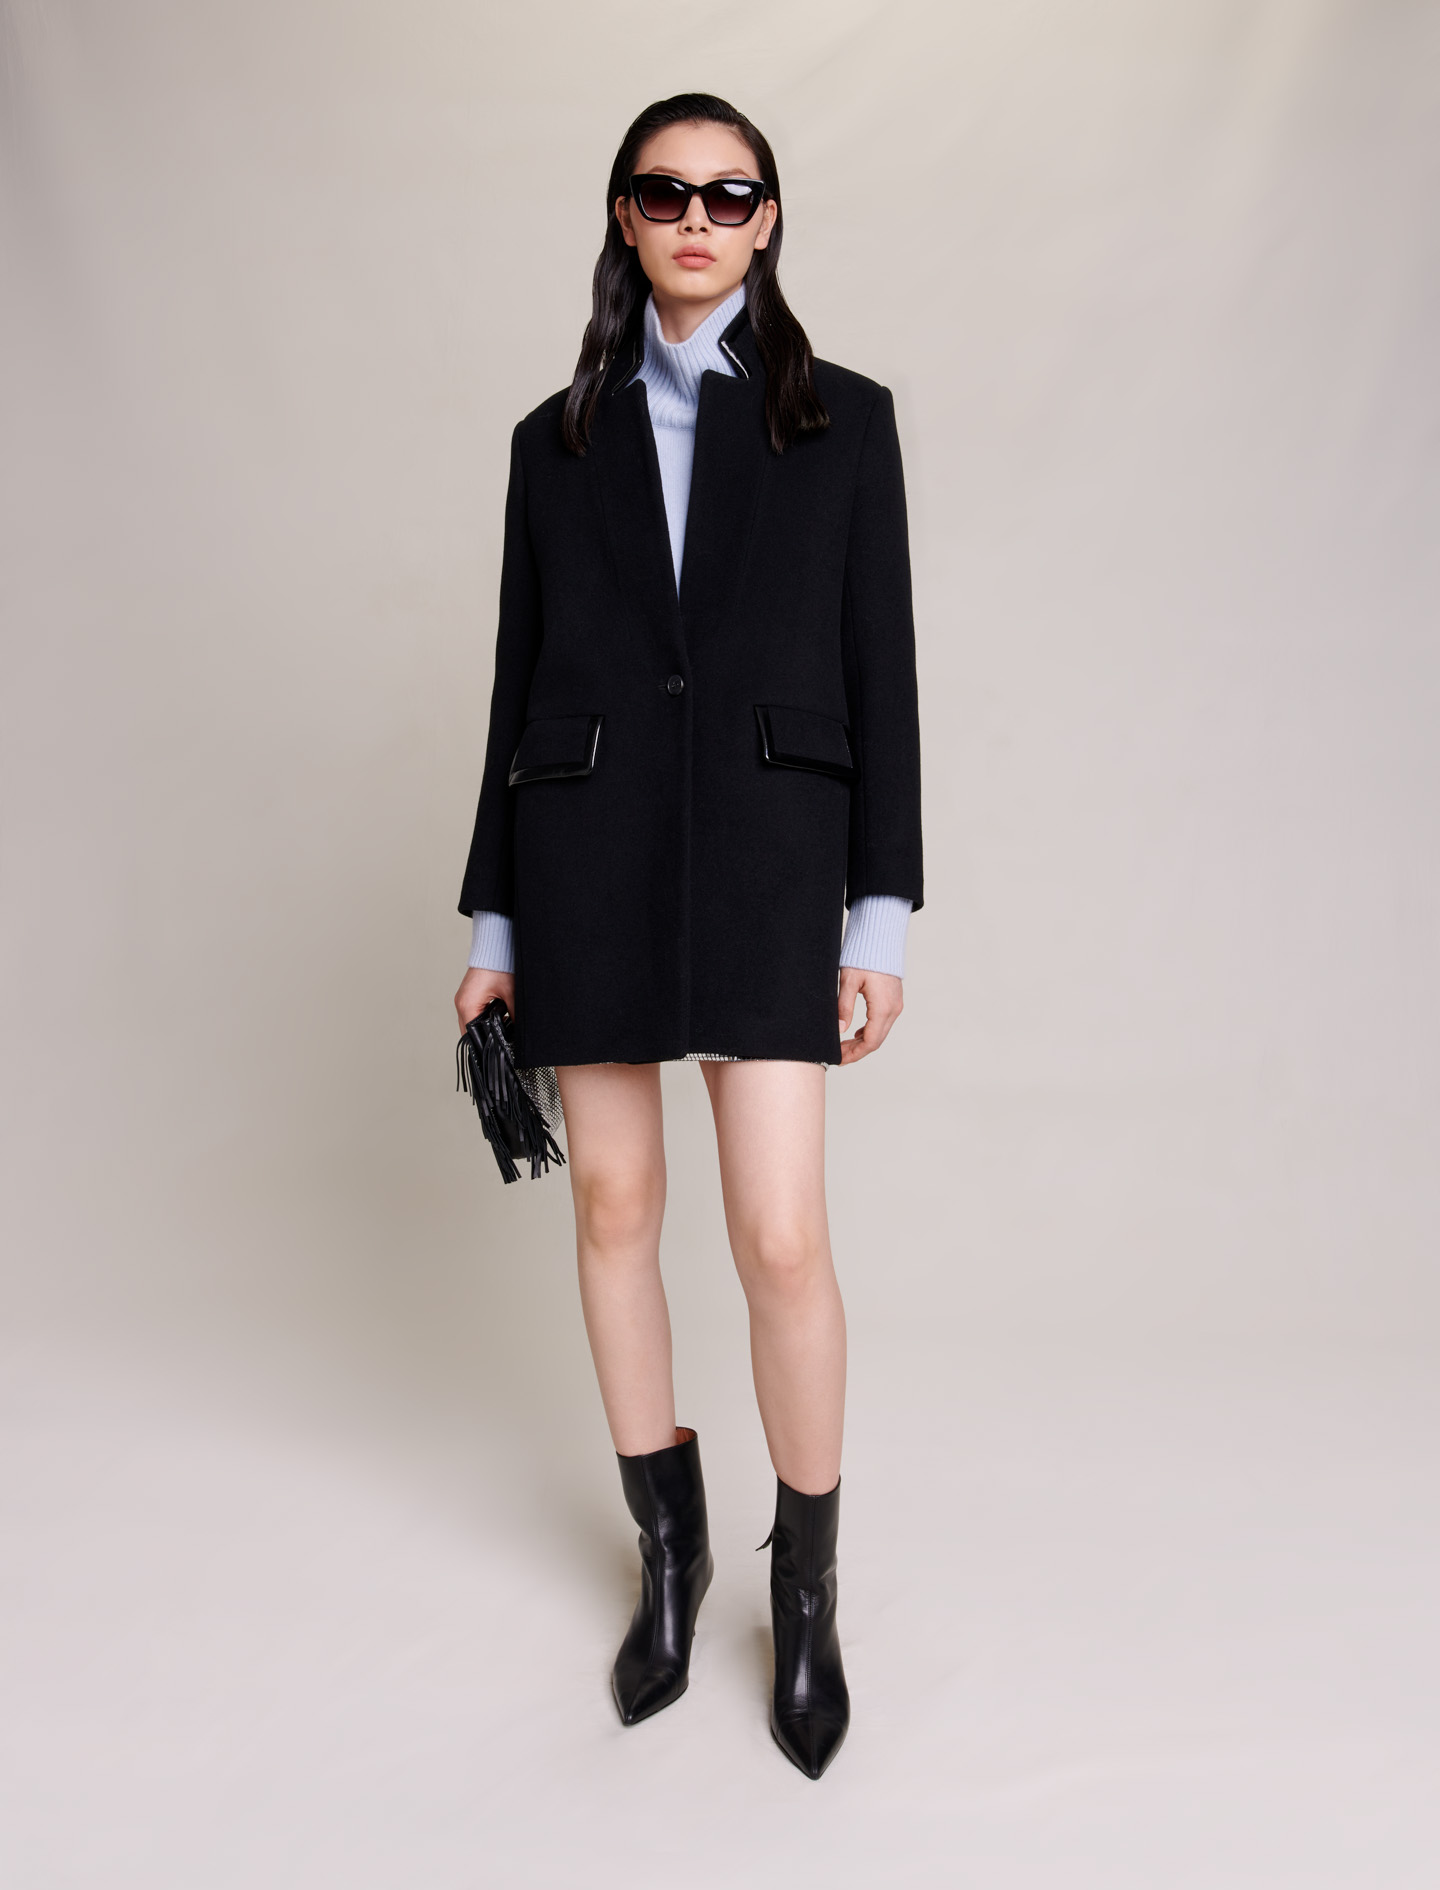 Maje Woman's wool, Mid-length coat for Fall/Winter, in color Black / Black